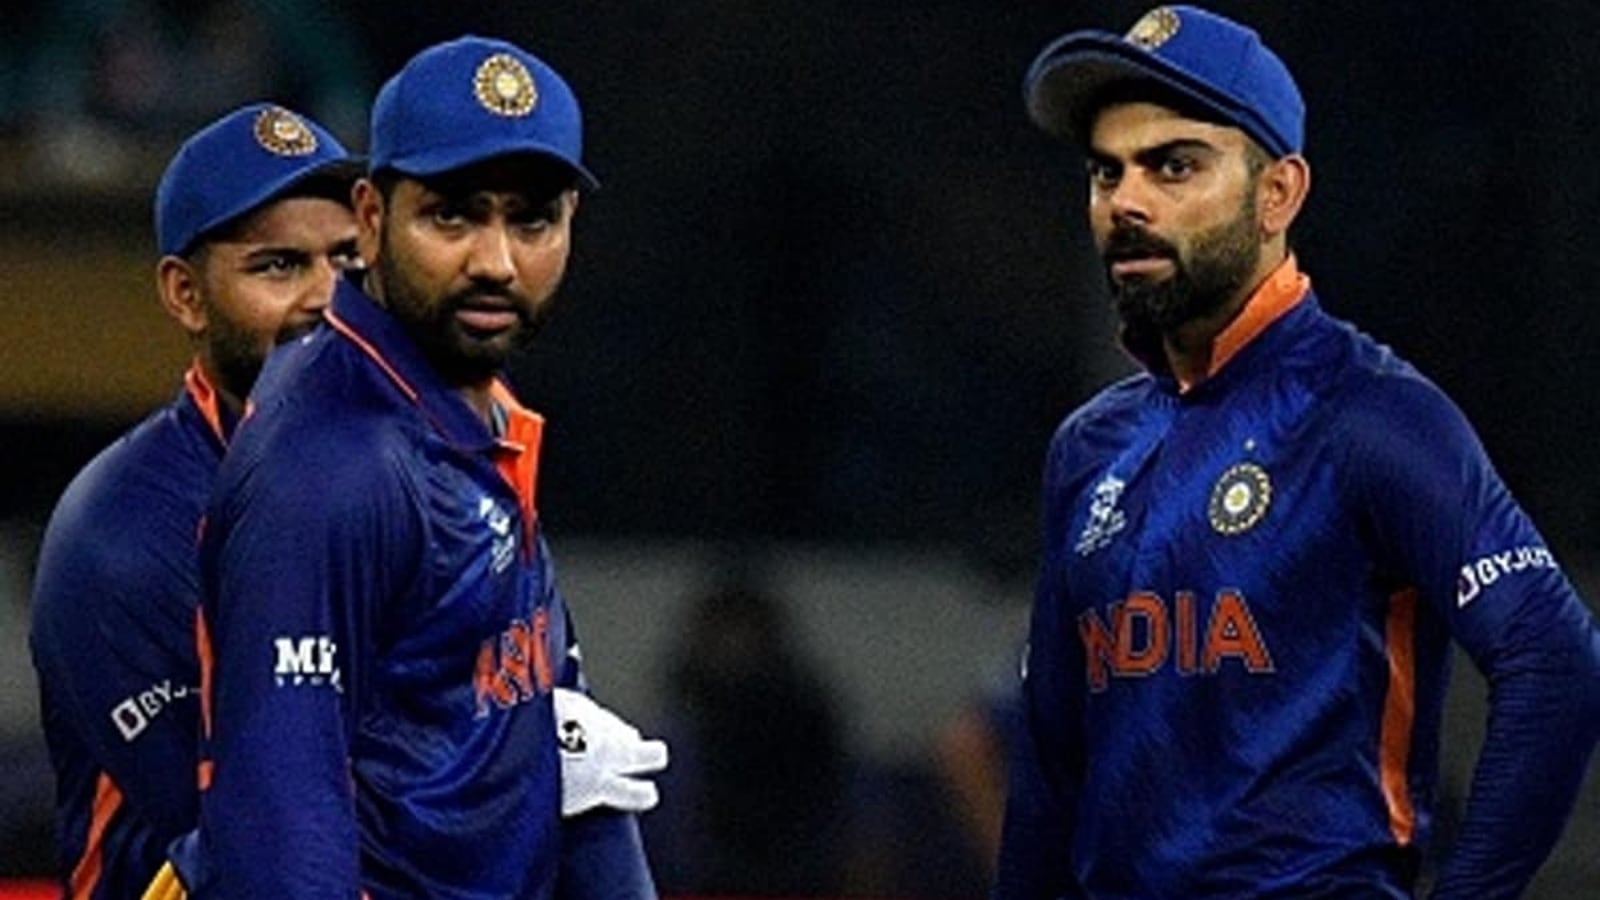 rohit-sharma-on-verge-of-levelling-virat-kohli-s-spectacular-captaincy-feat-in-pakistan-asia-cup-clash